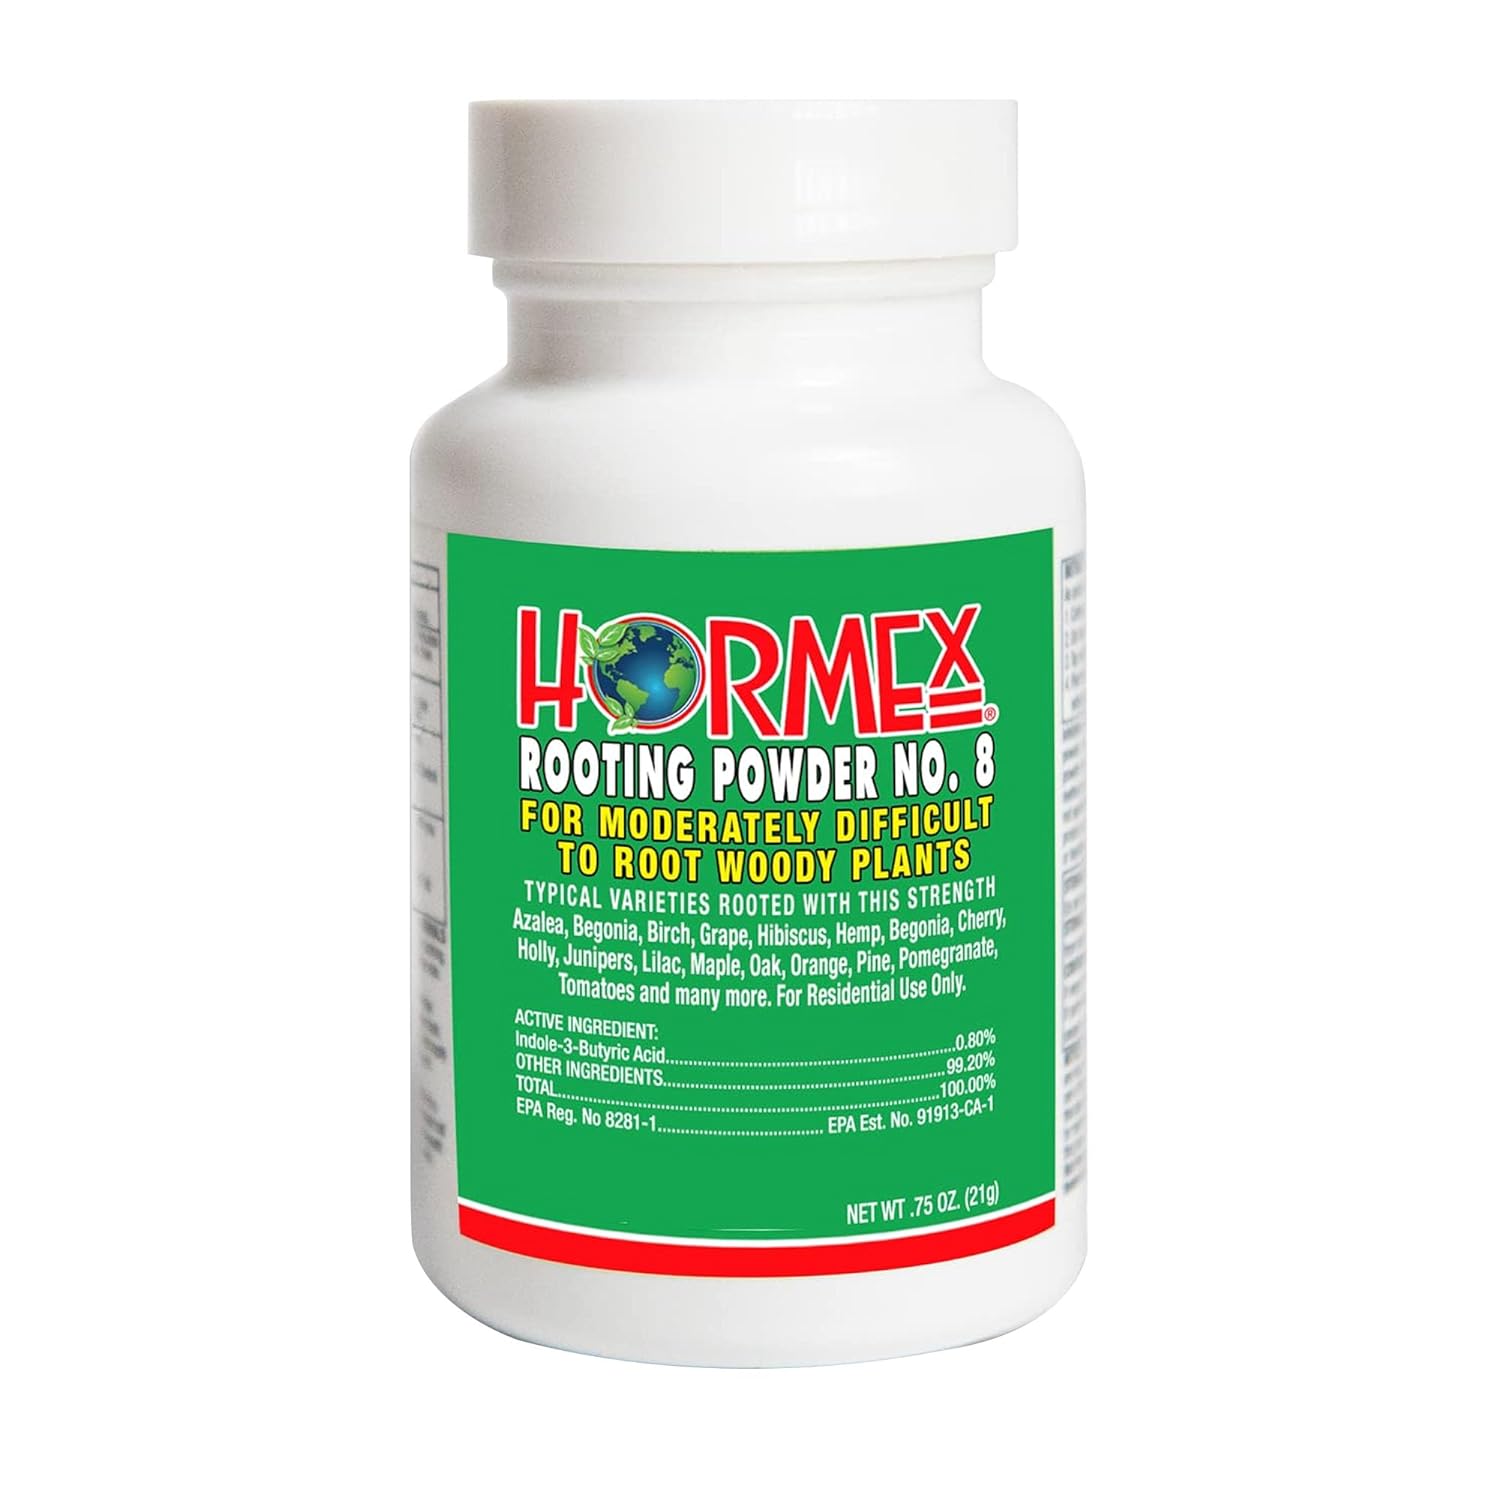 Hormex Rooting Powder #8 - for Moderately Difficult to Root Plants - 0.8 IBA Rooting Hormone for Plant Cuttings - Fast Effective - Free of Alcohol, Dye, Gel Preservatives for Healthier Roots, 21g